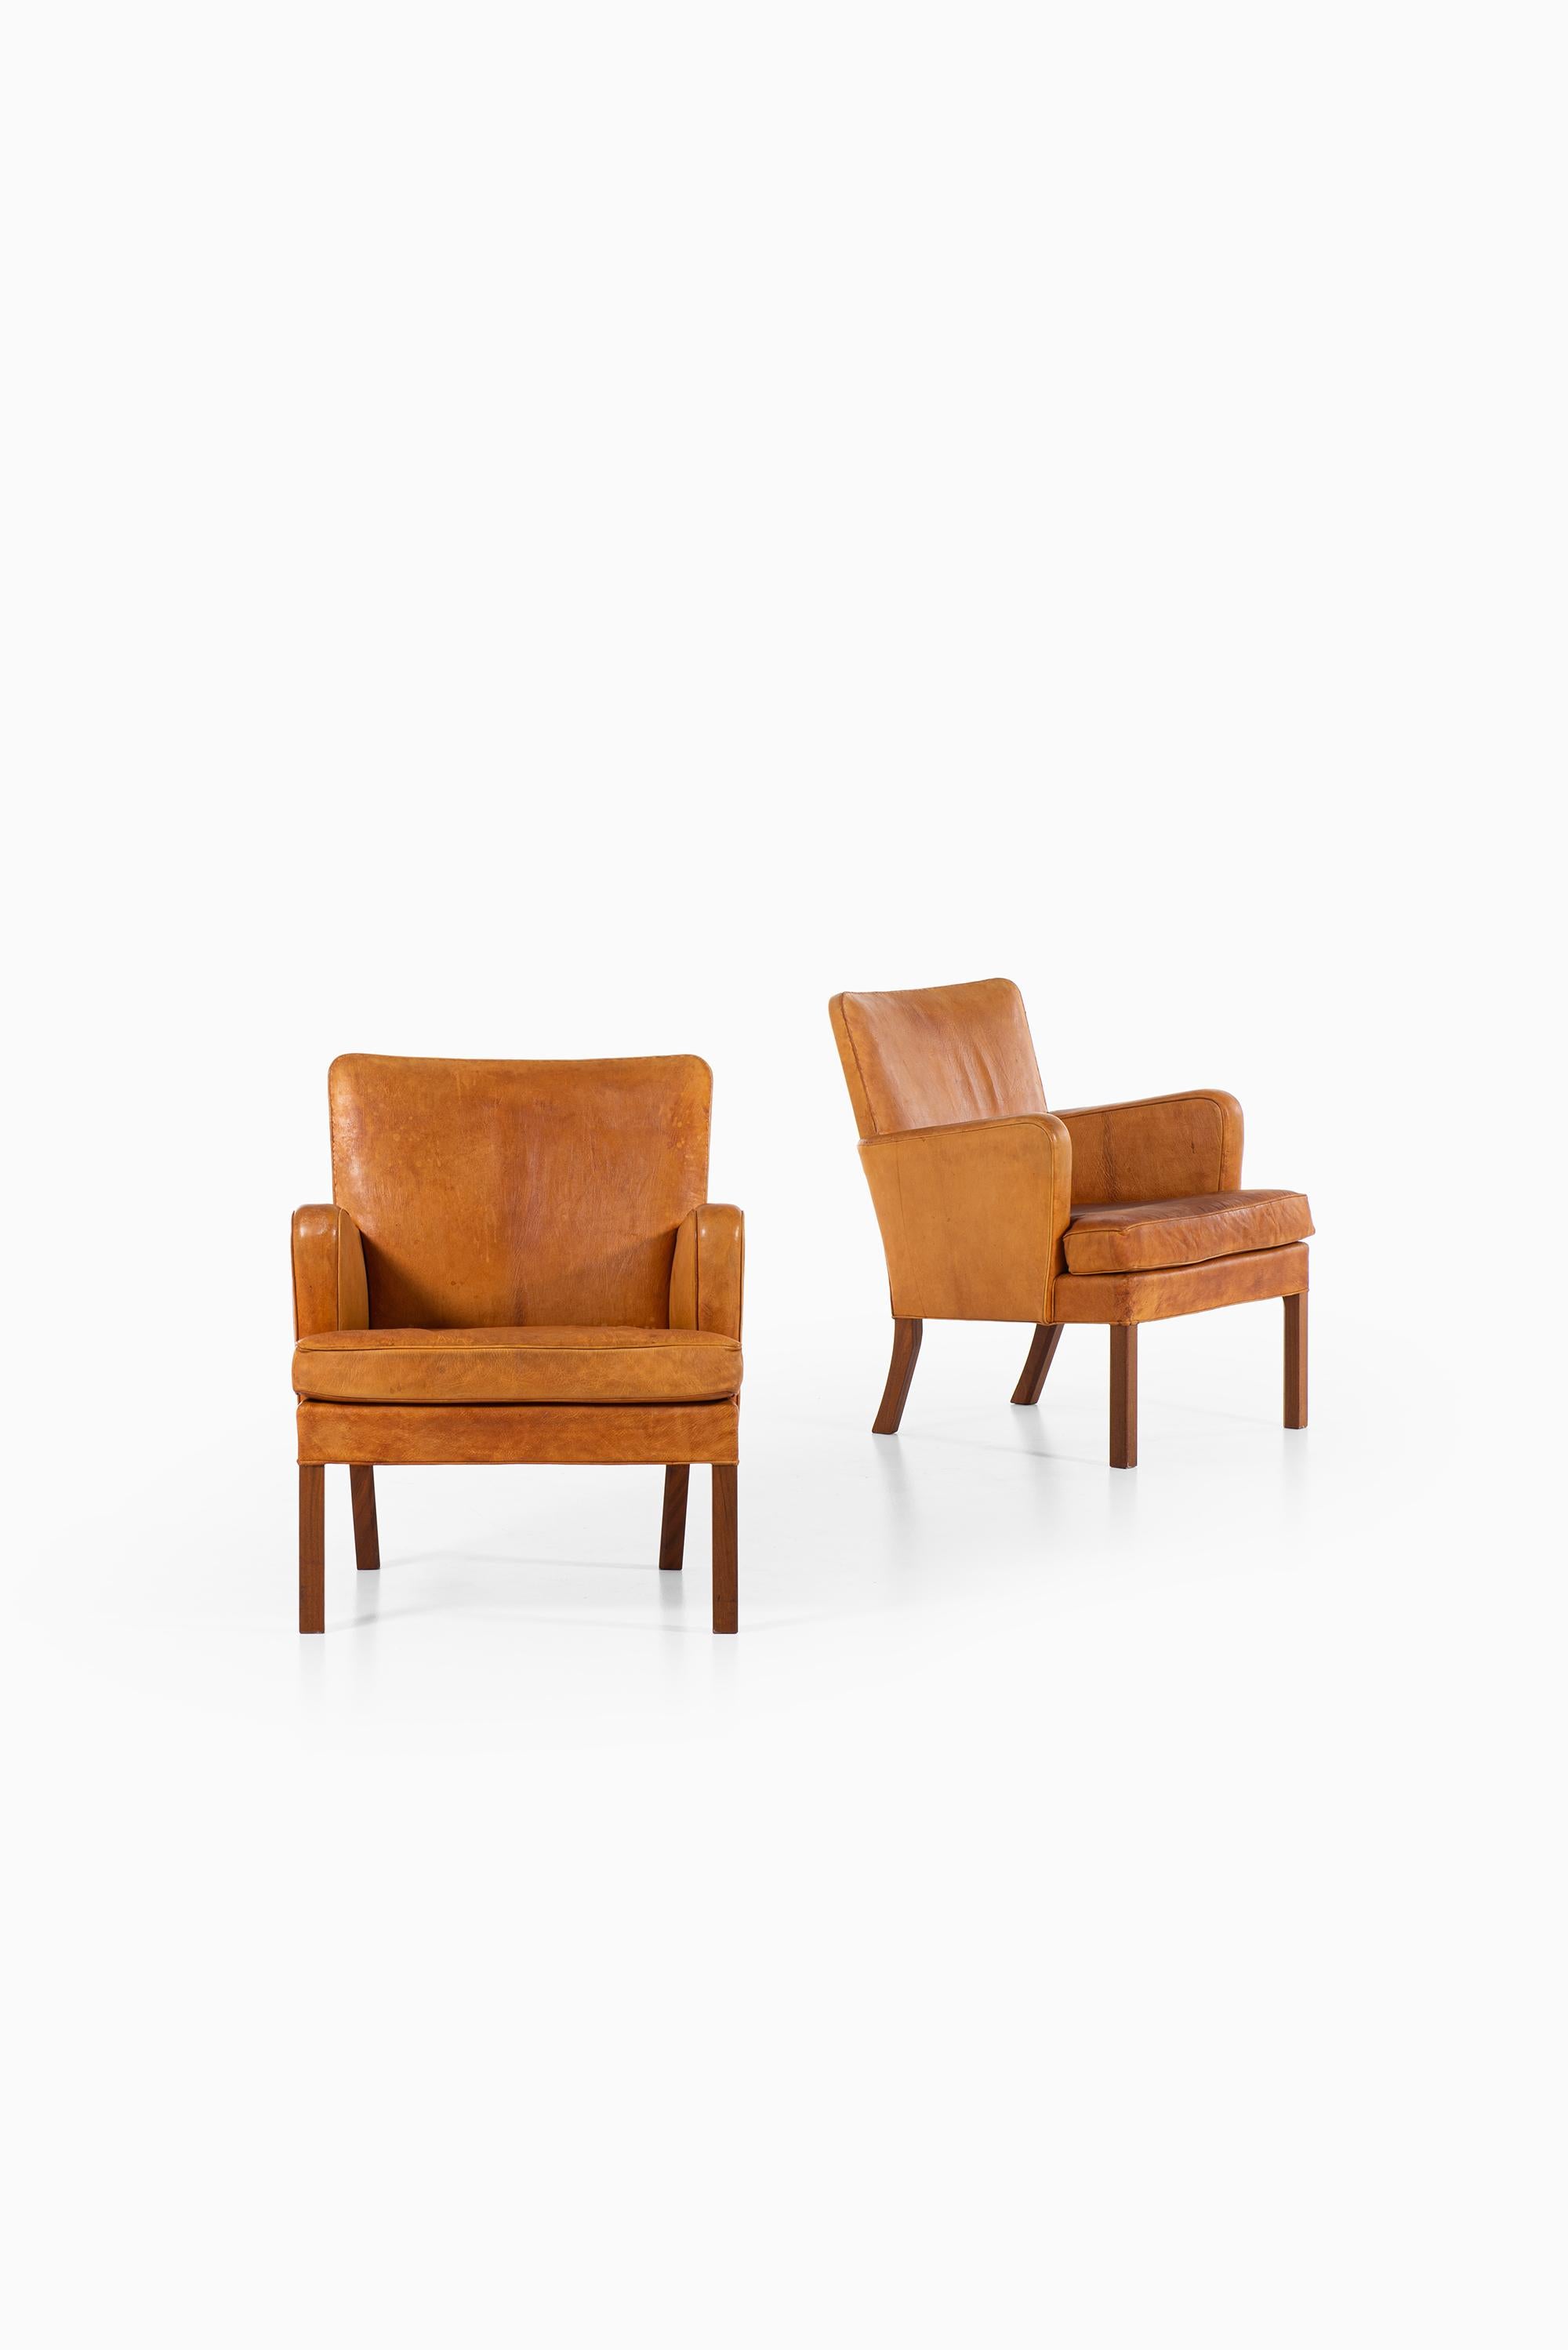 Rare pair of easy chairs model 5313 designed by Kaare Klint. Produced by Rud. Rasmussen Cabinetmakers in Denmark.